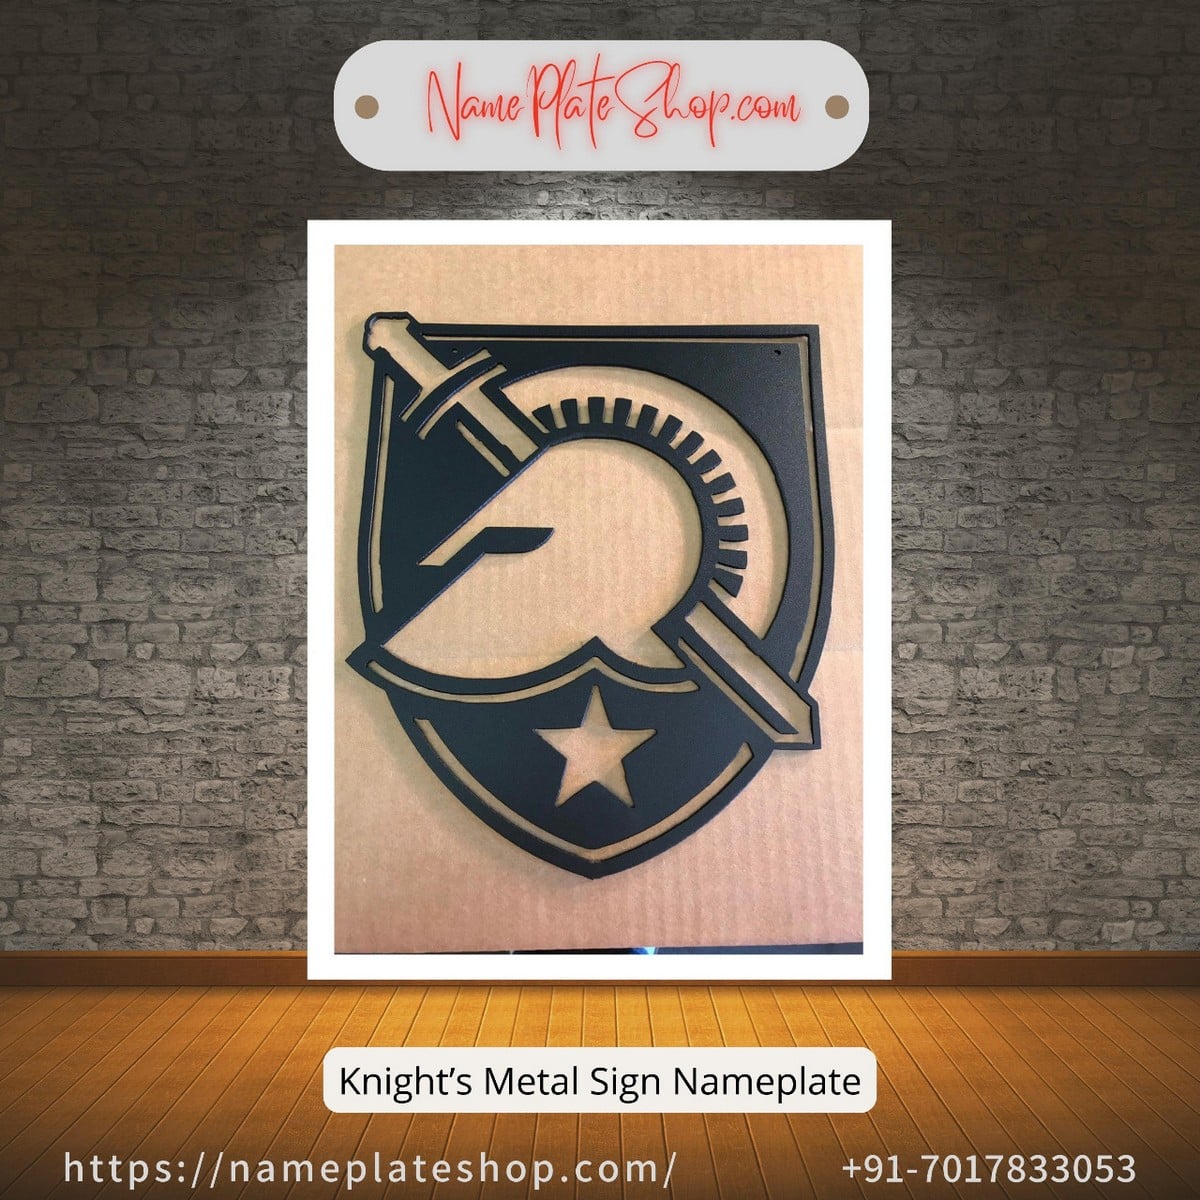 Best Knights Metal Sign Name Plate Online At NamePlateShop